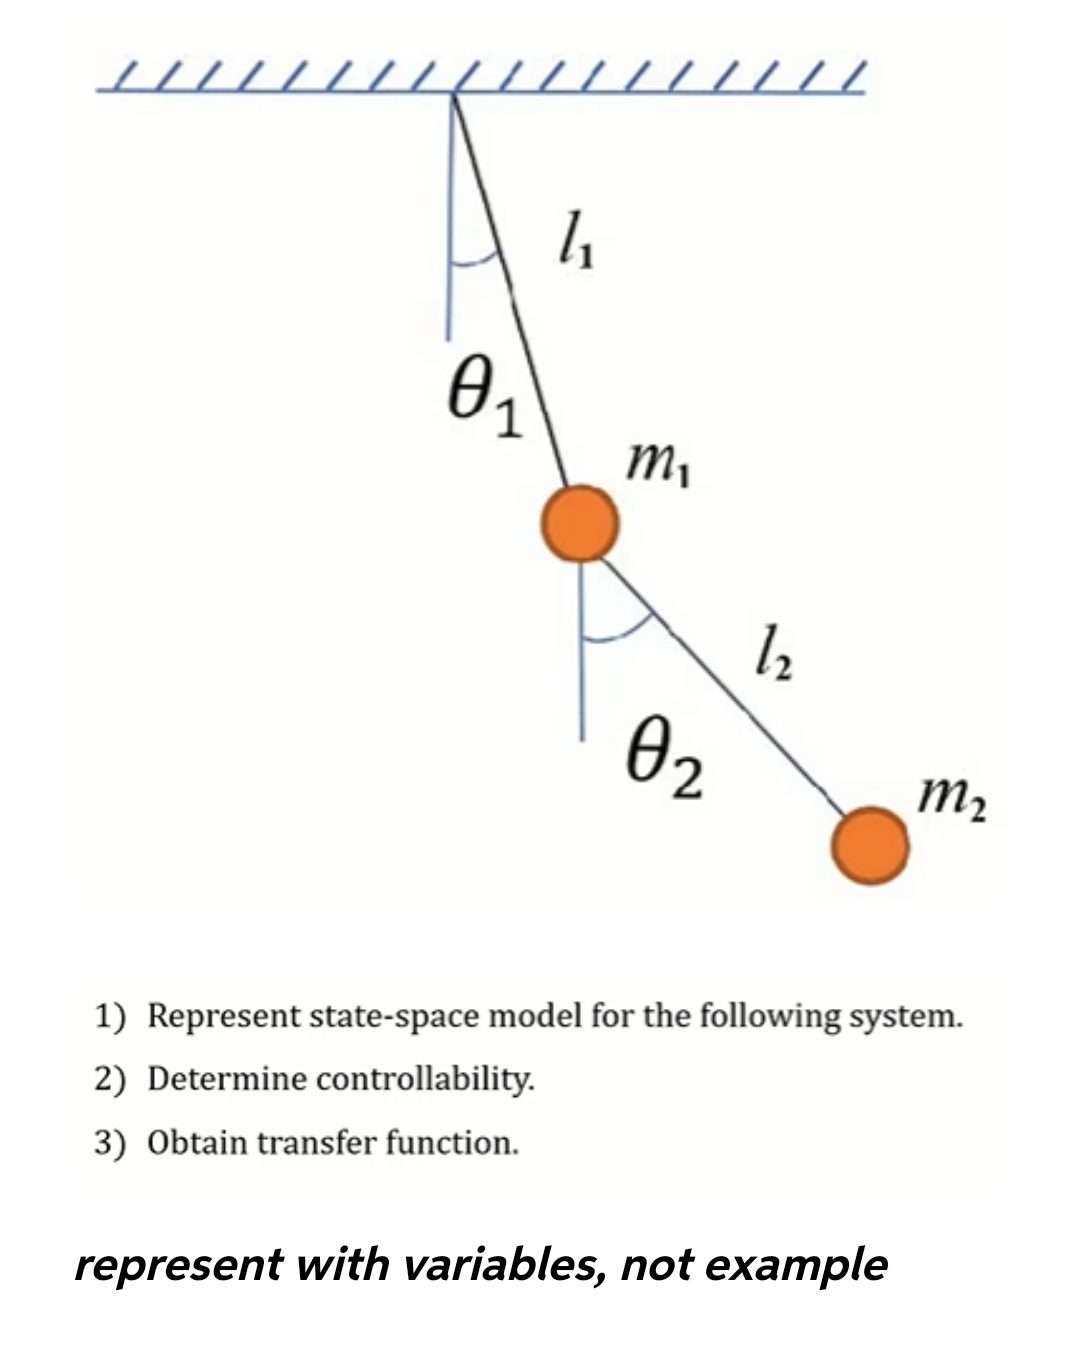 ////
// / /
1
M,
l2
02
m2
1) Represent state-space model for the following system.
2) Determine controllability.
3) Obtain transfer function.
represent with variables, not example
